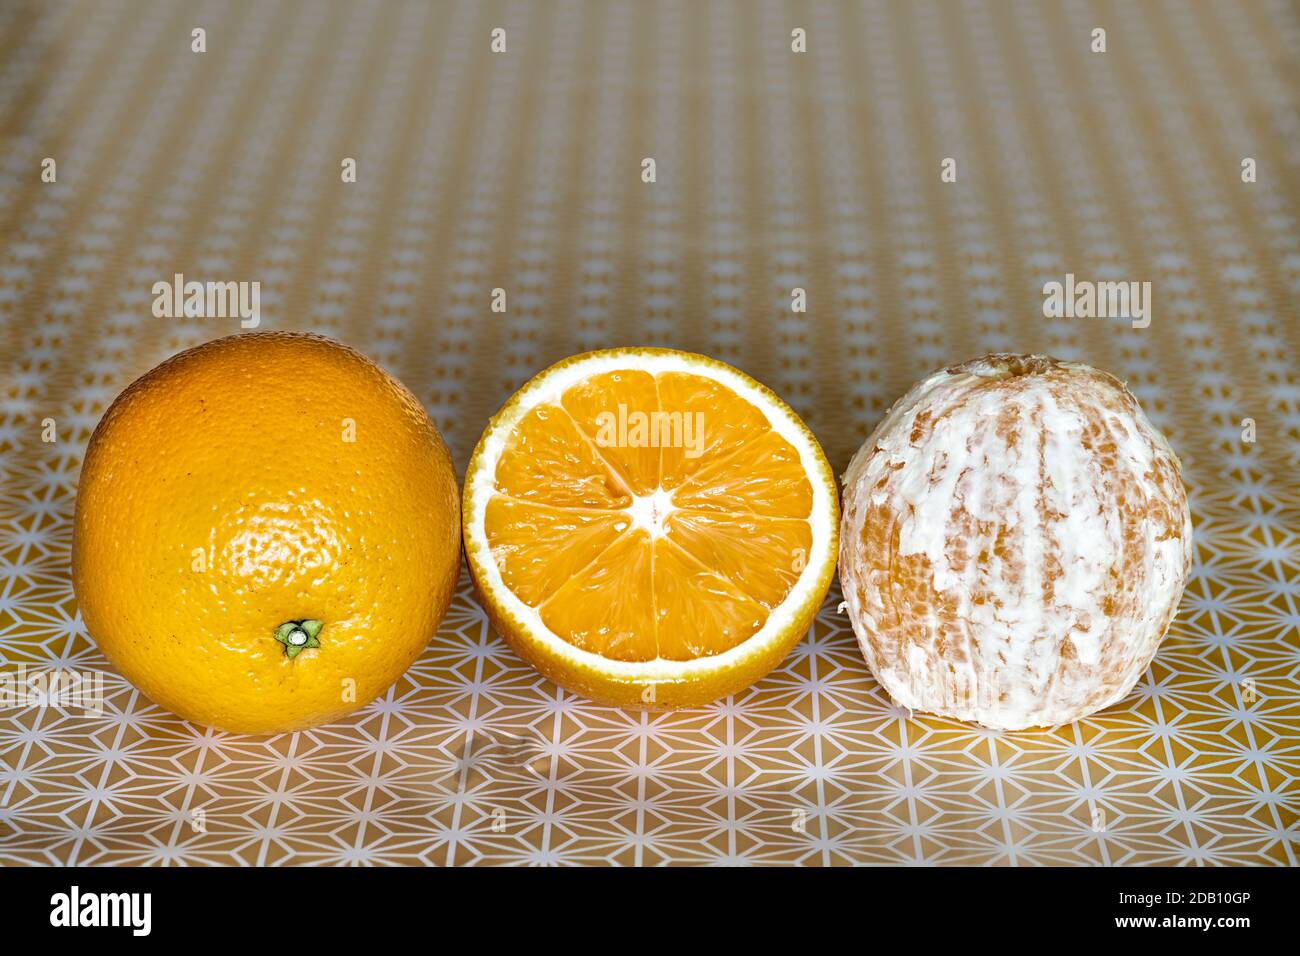 Same but different; an orange in different states, with dominant colour. Stock Photo